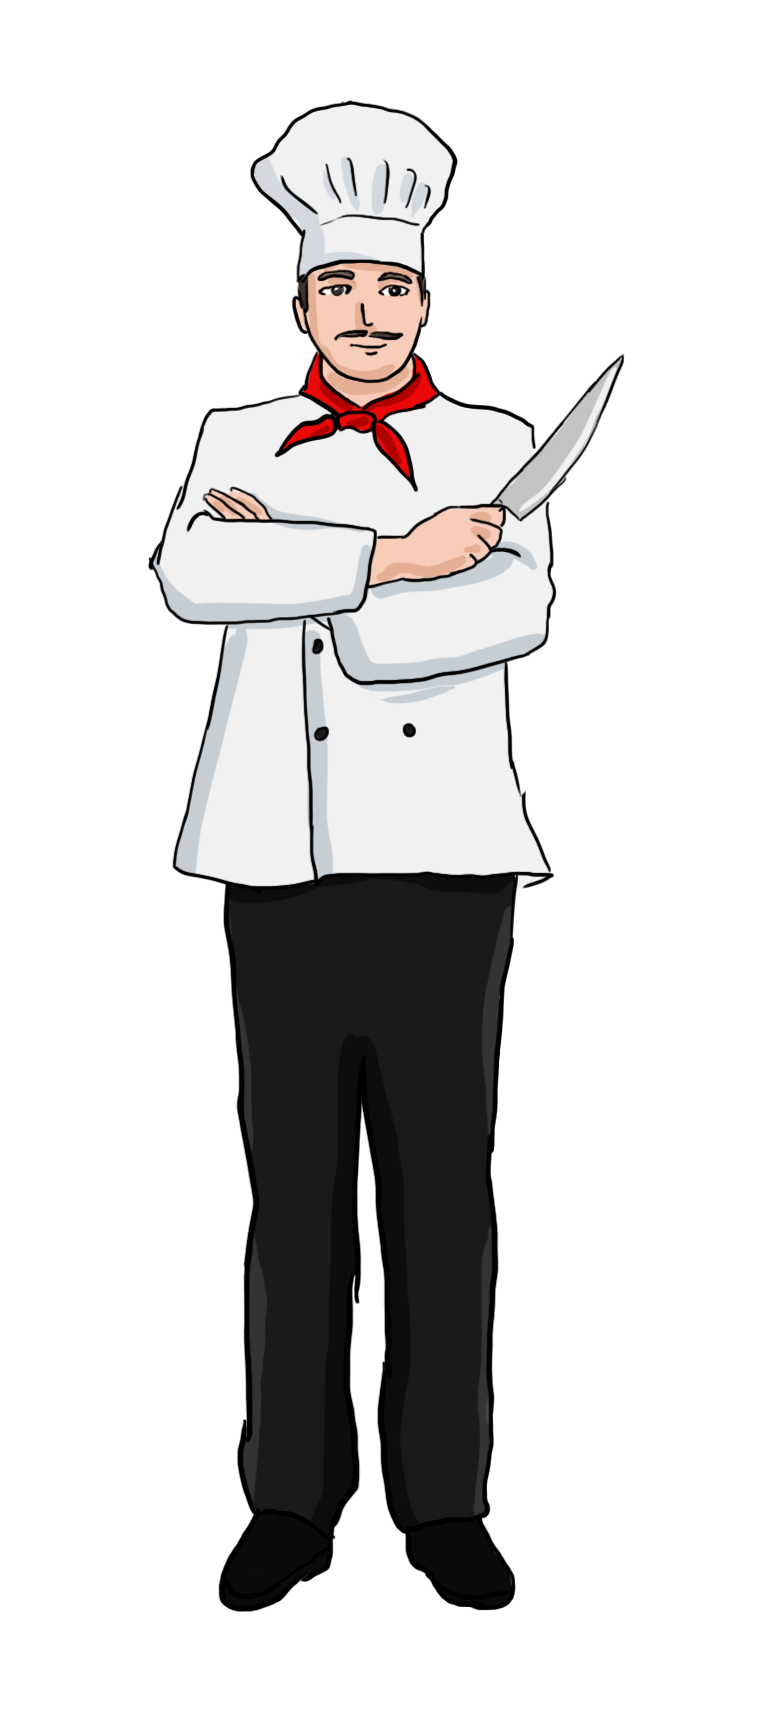 Chef To Use Transparent Image Clipart